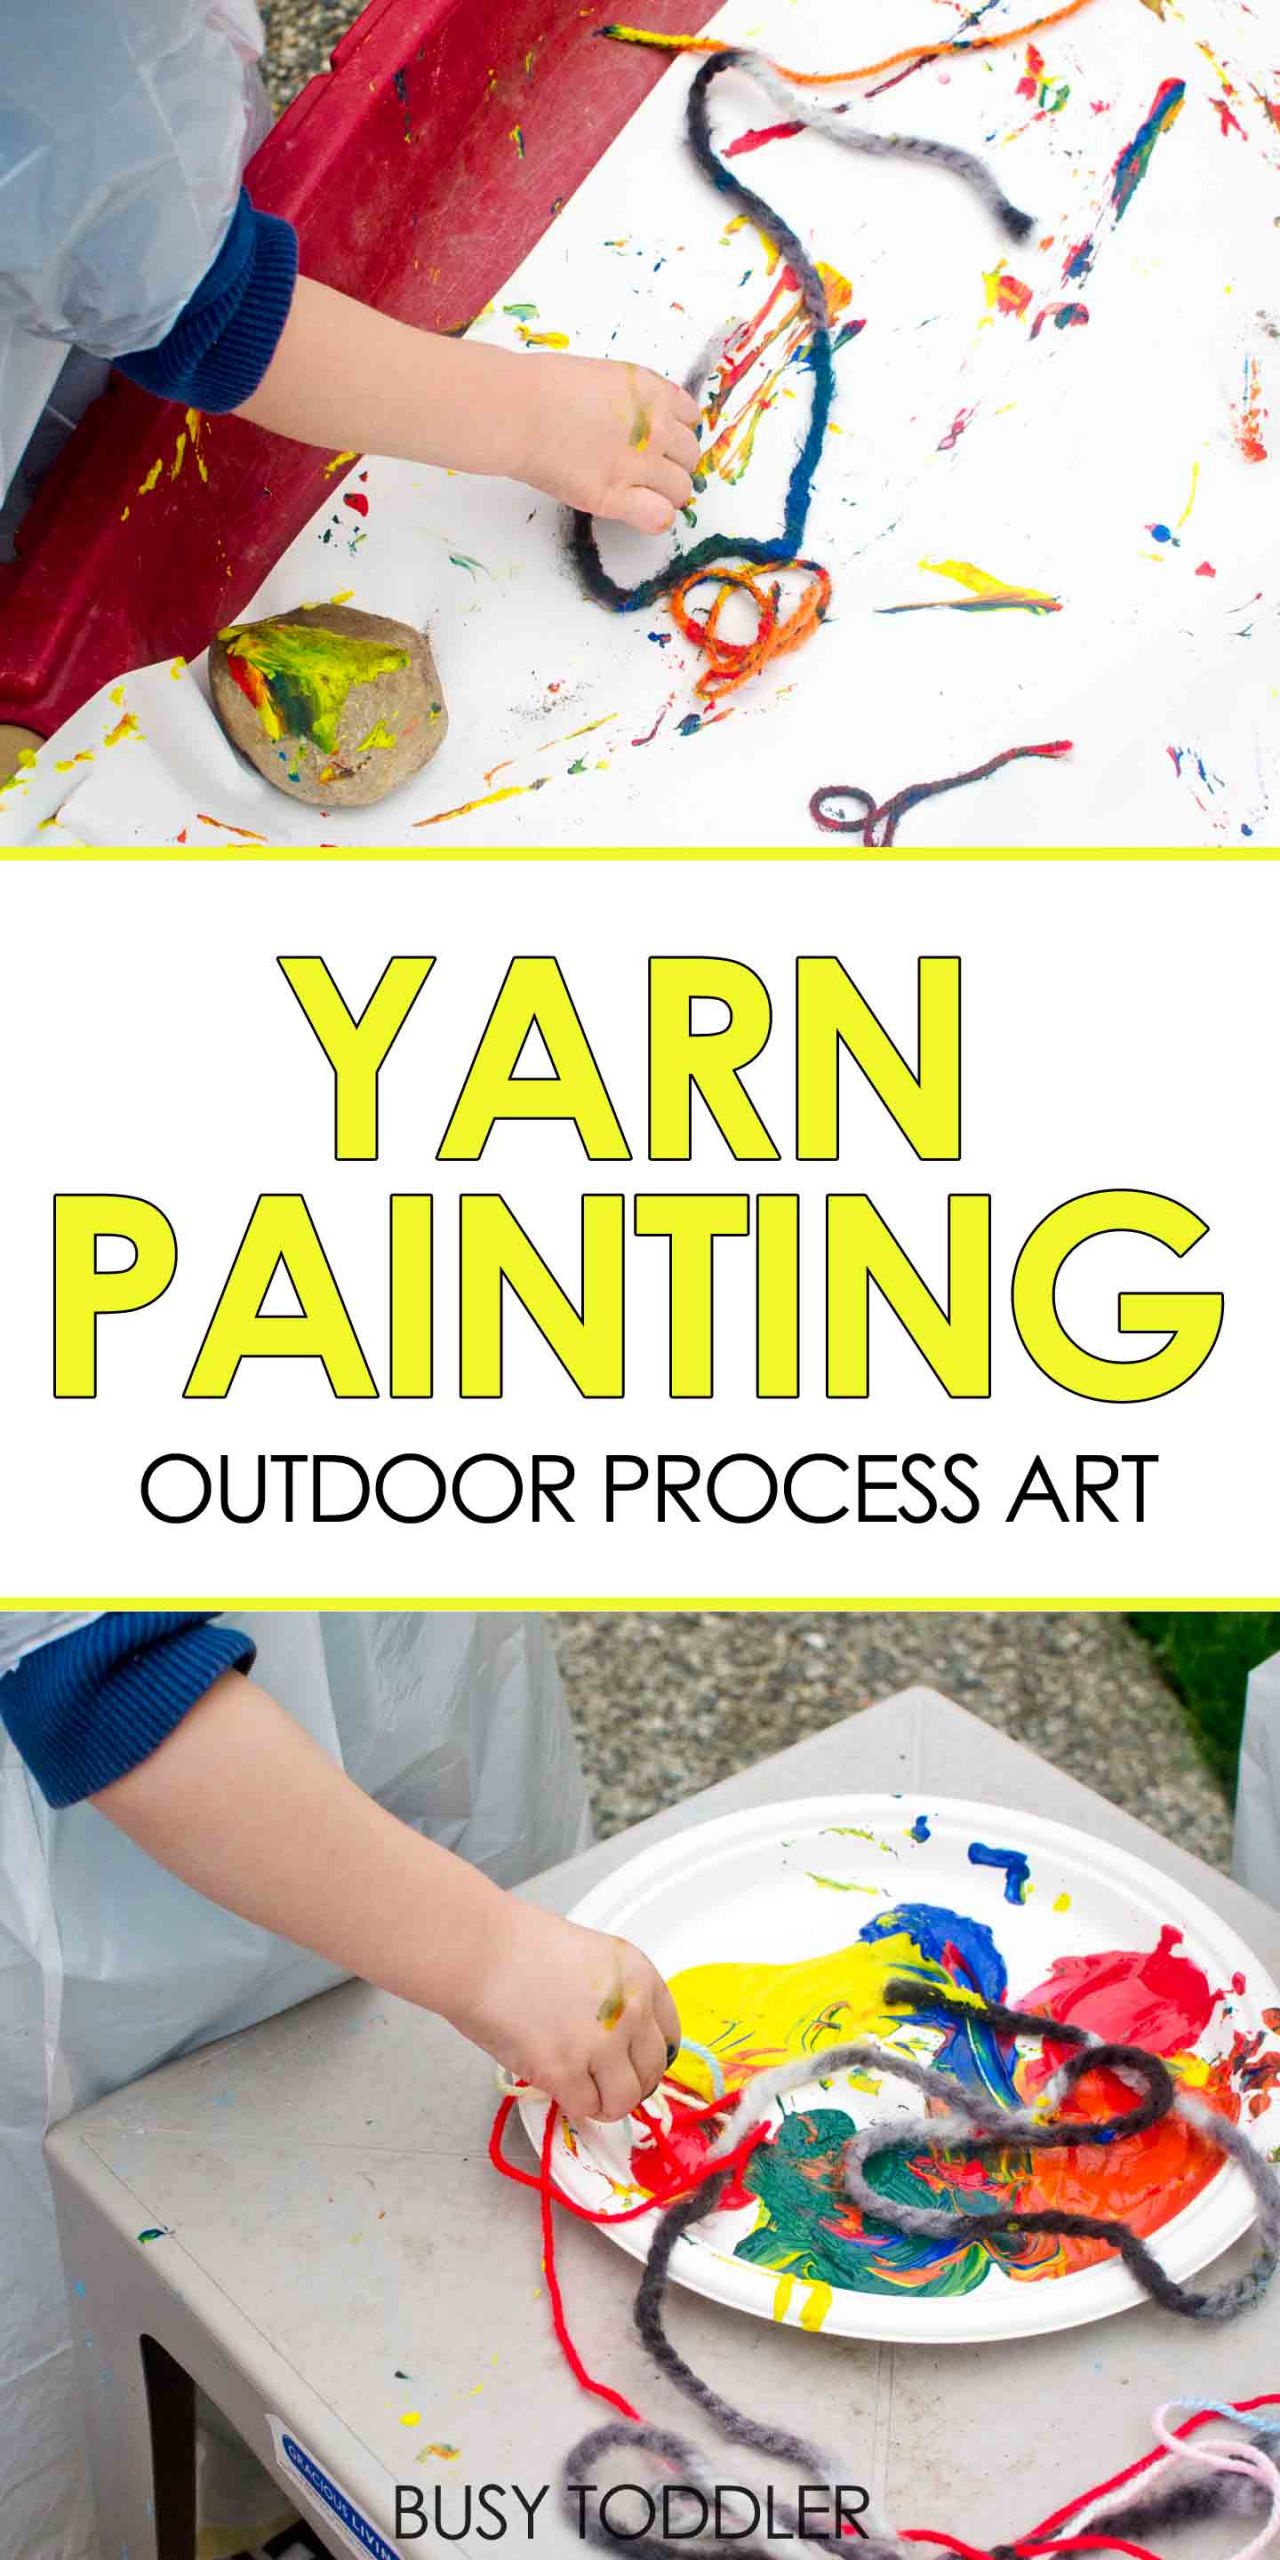 Toddler Artwork Ideas
 Yarn Painting Outdoor Process Art Busy Toddler